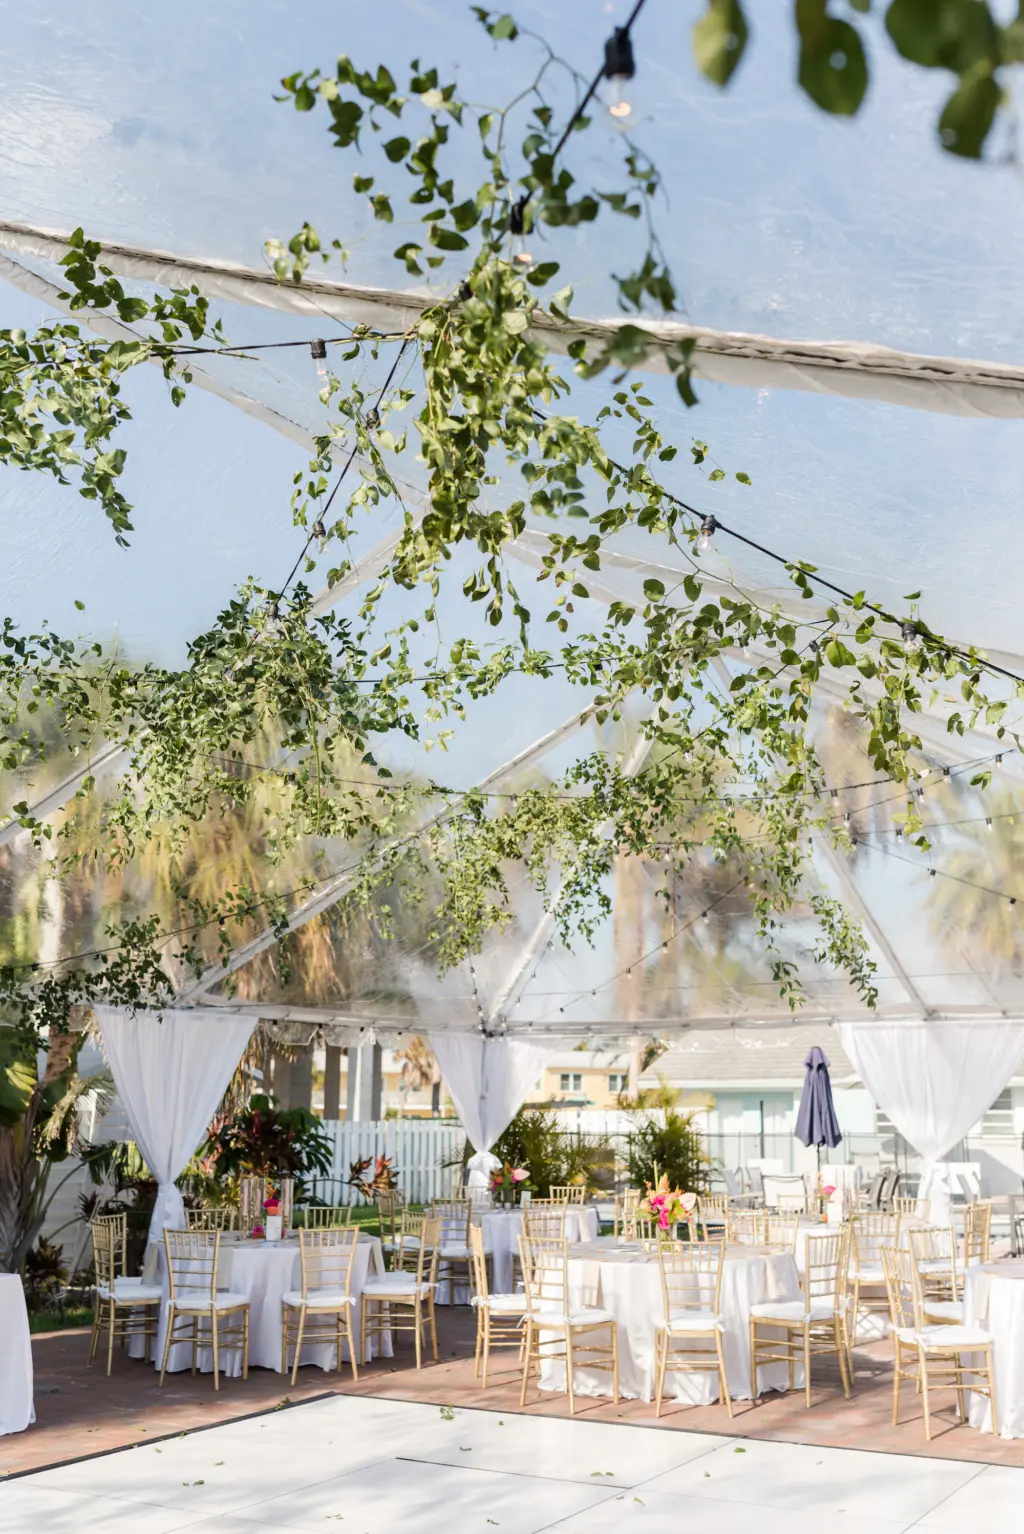 Tented Tropical Beach Wedding Reception Ideas with Greenery and Pops of Color Greenery Detailing | Sarasota Planner MDP Events | Florist Save the Date Florida